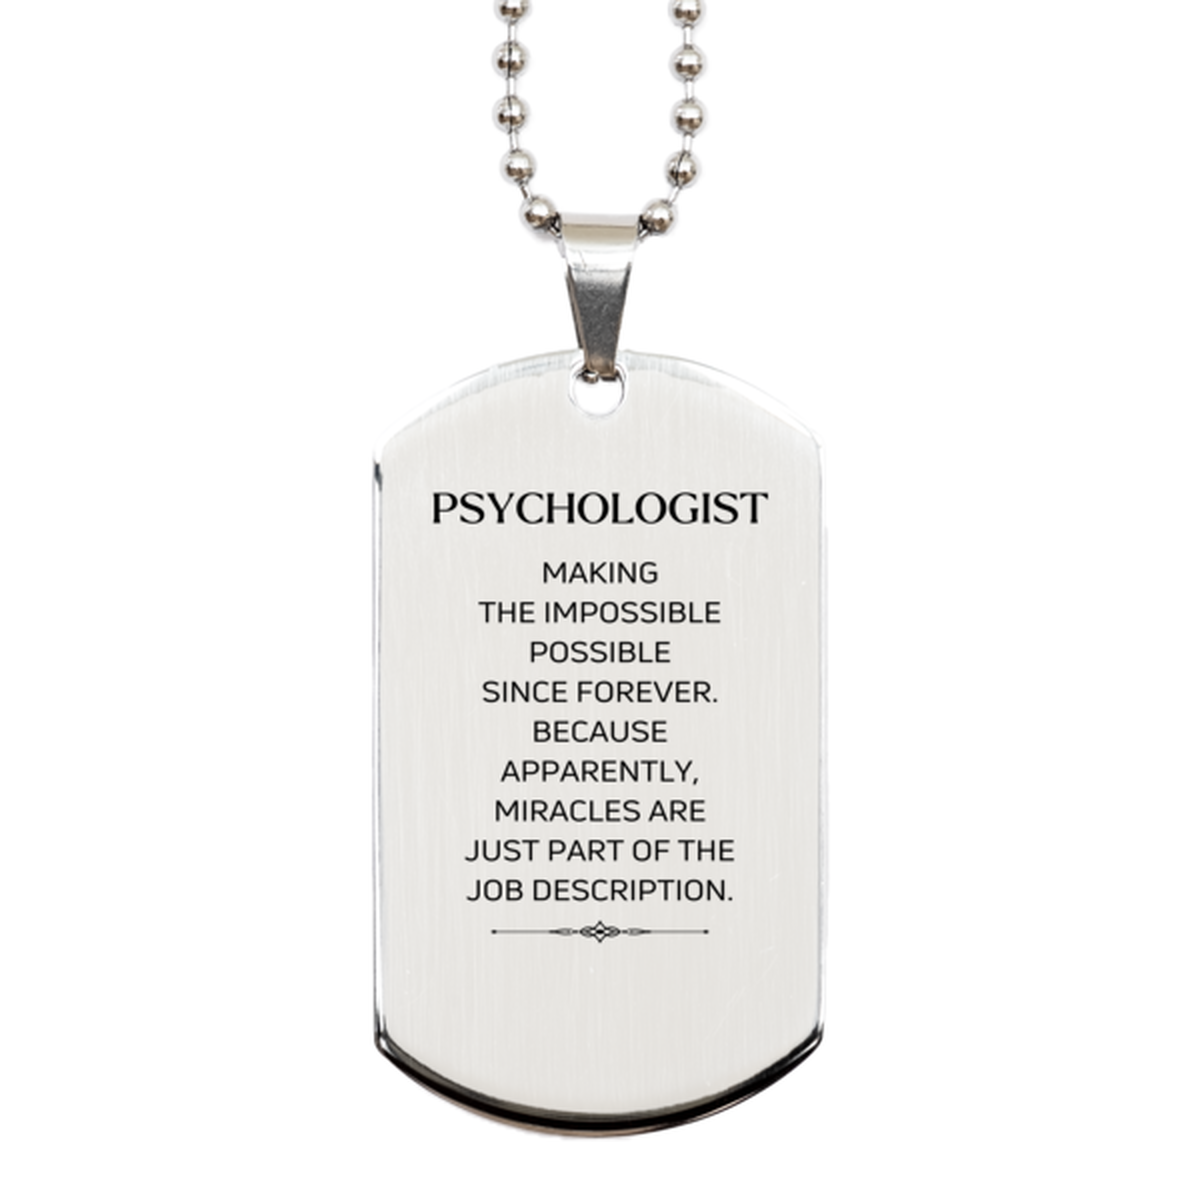 Funny Psychologist Gifts, Miracles are just part of the job description, Inspirational Birthday Silver Dog Tag For Psychologist, Men, Women, Coworkers, Friends, Boss